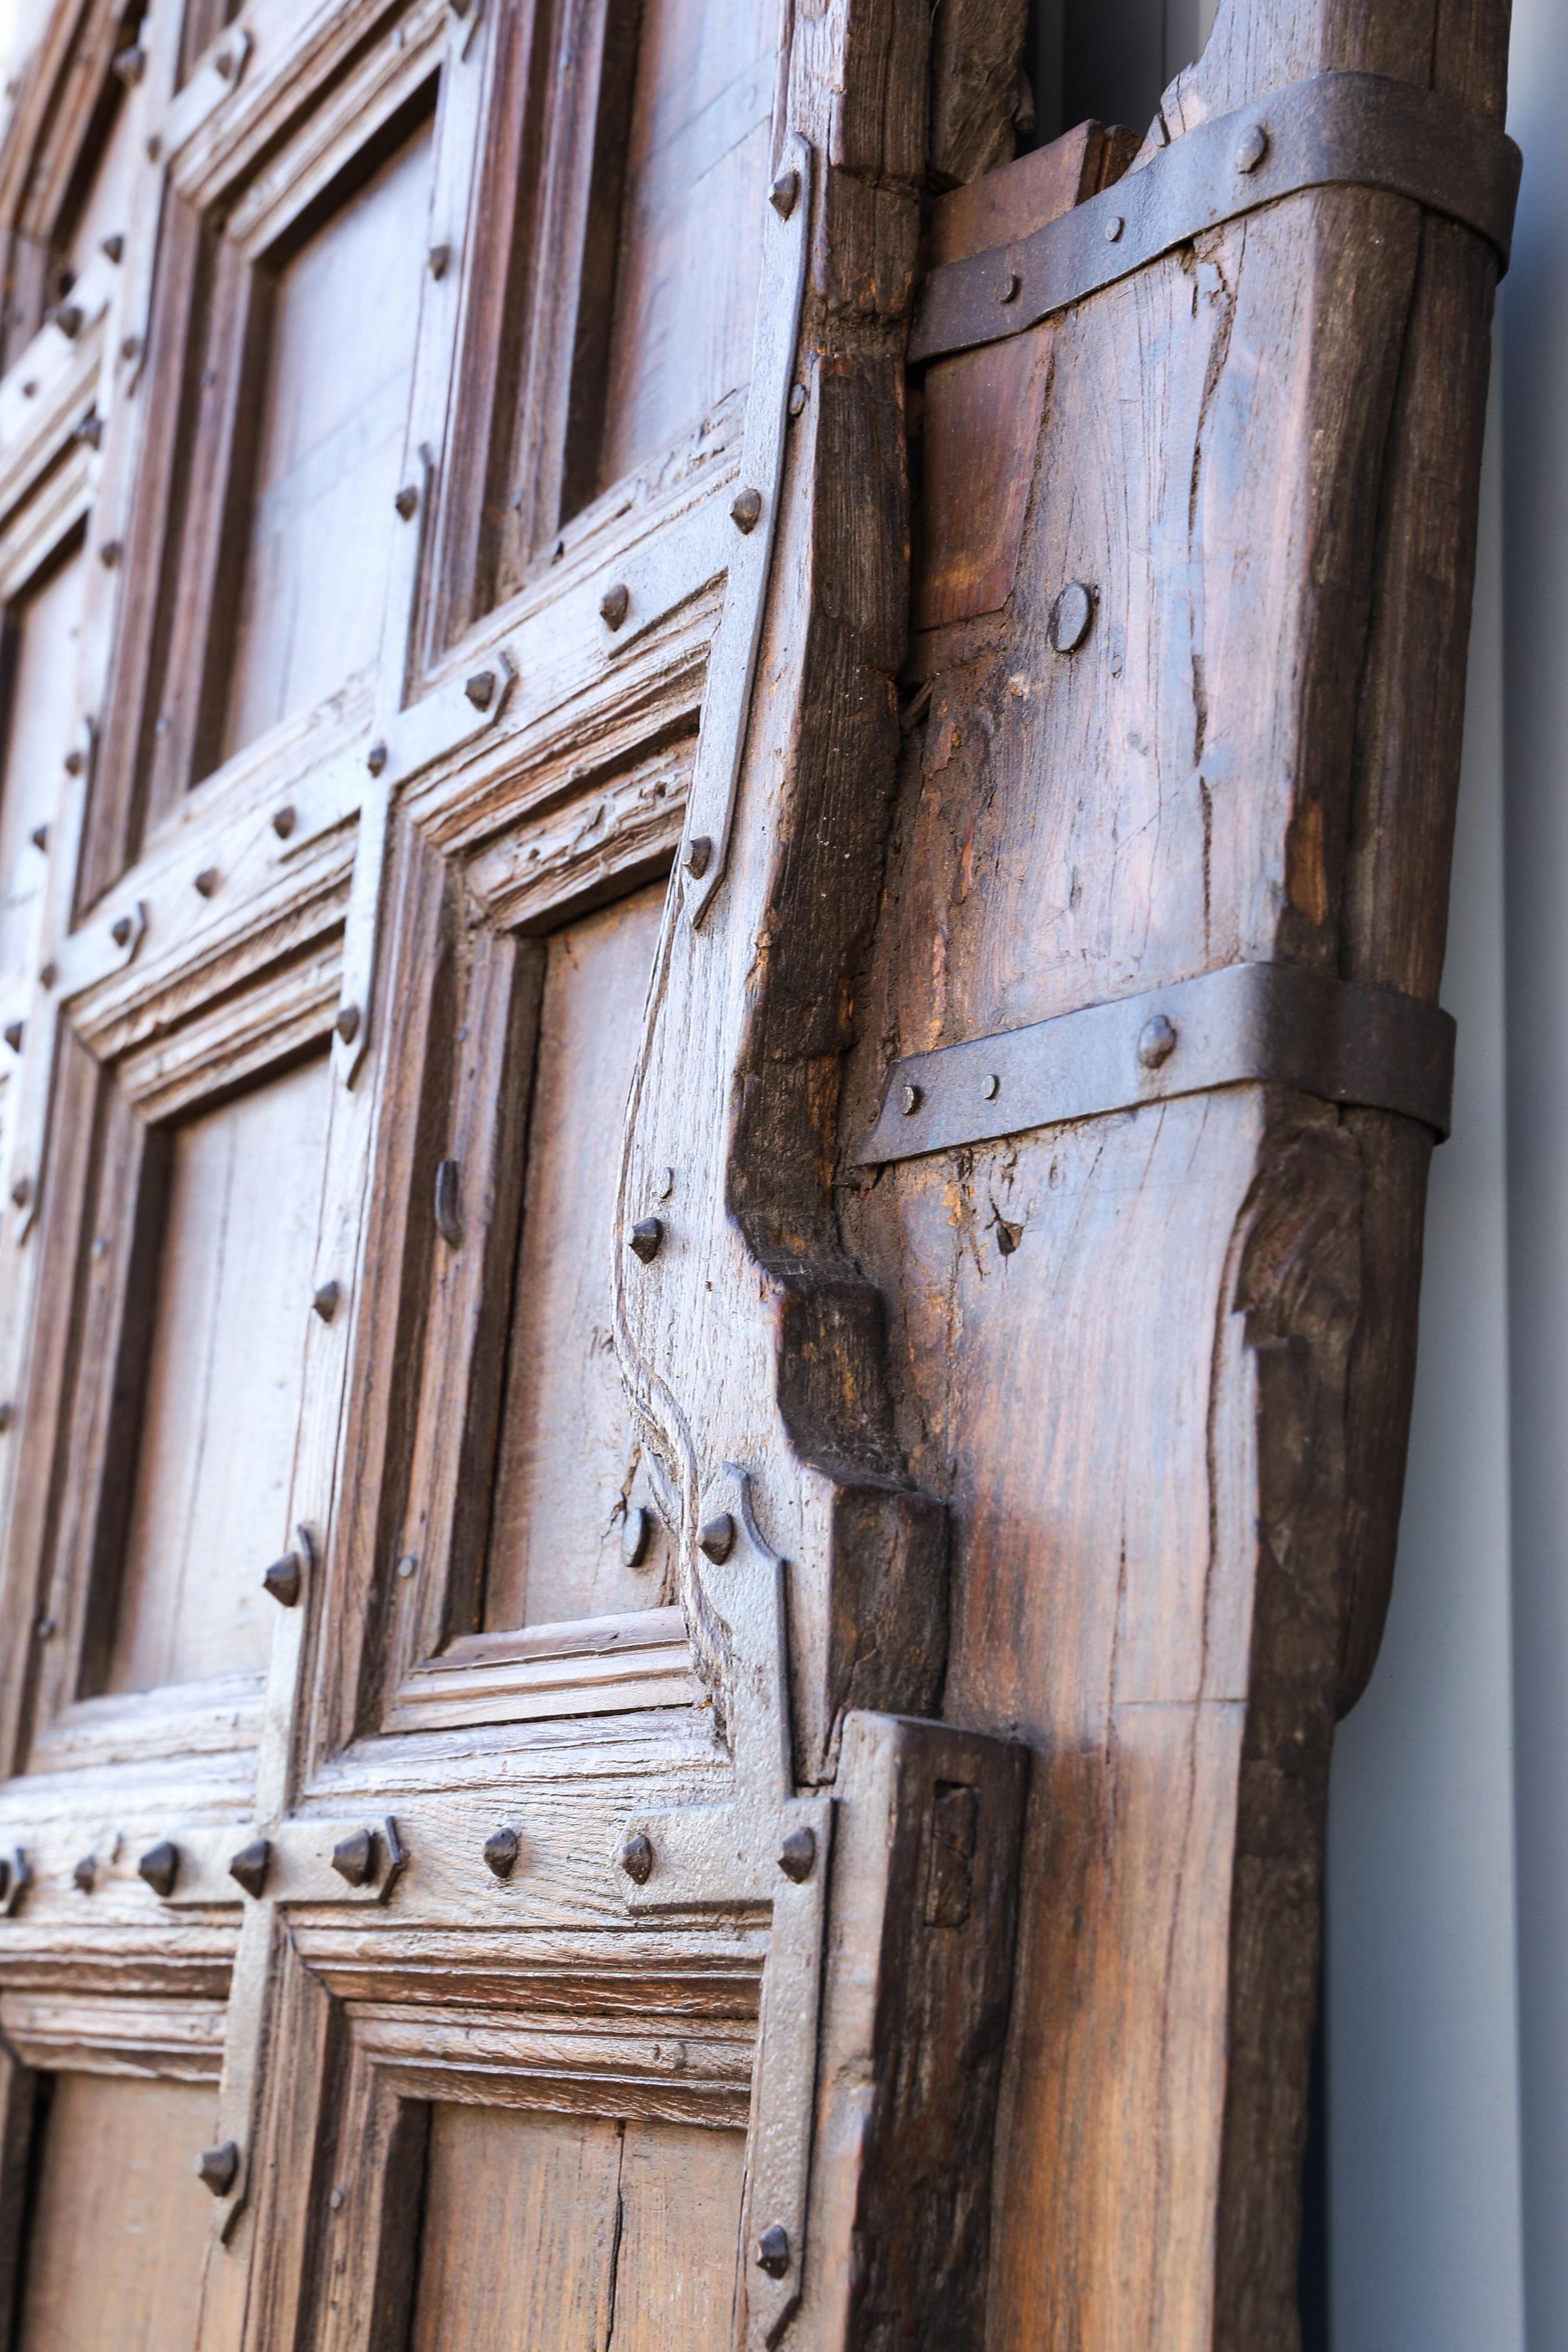 This is a large solid teak wood heavily made doors used in castles. The age of these doors can be determined by the general construction and also by the way the doors are attached to the building. The two pegs on the doors revolve on the toughs